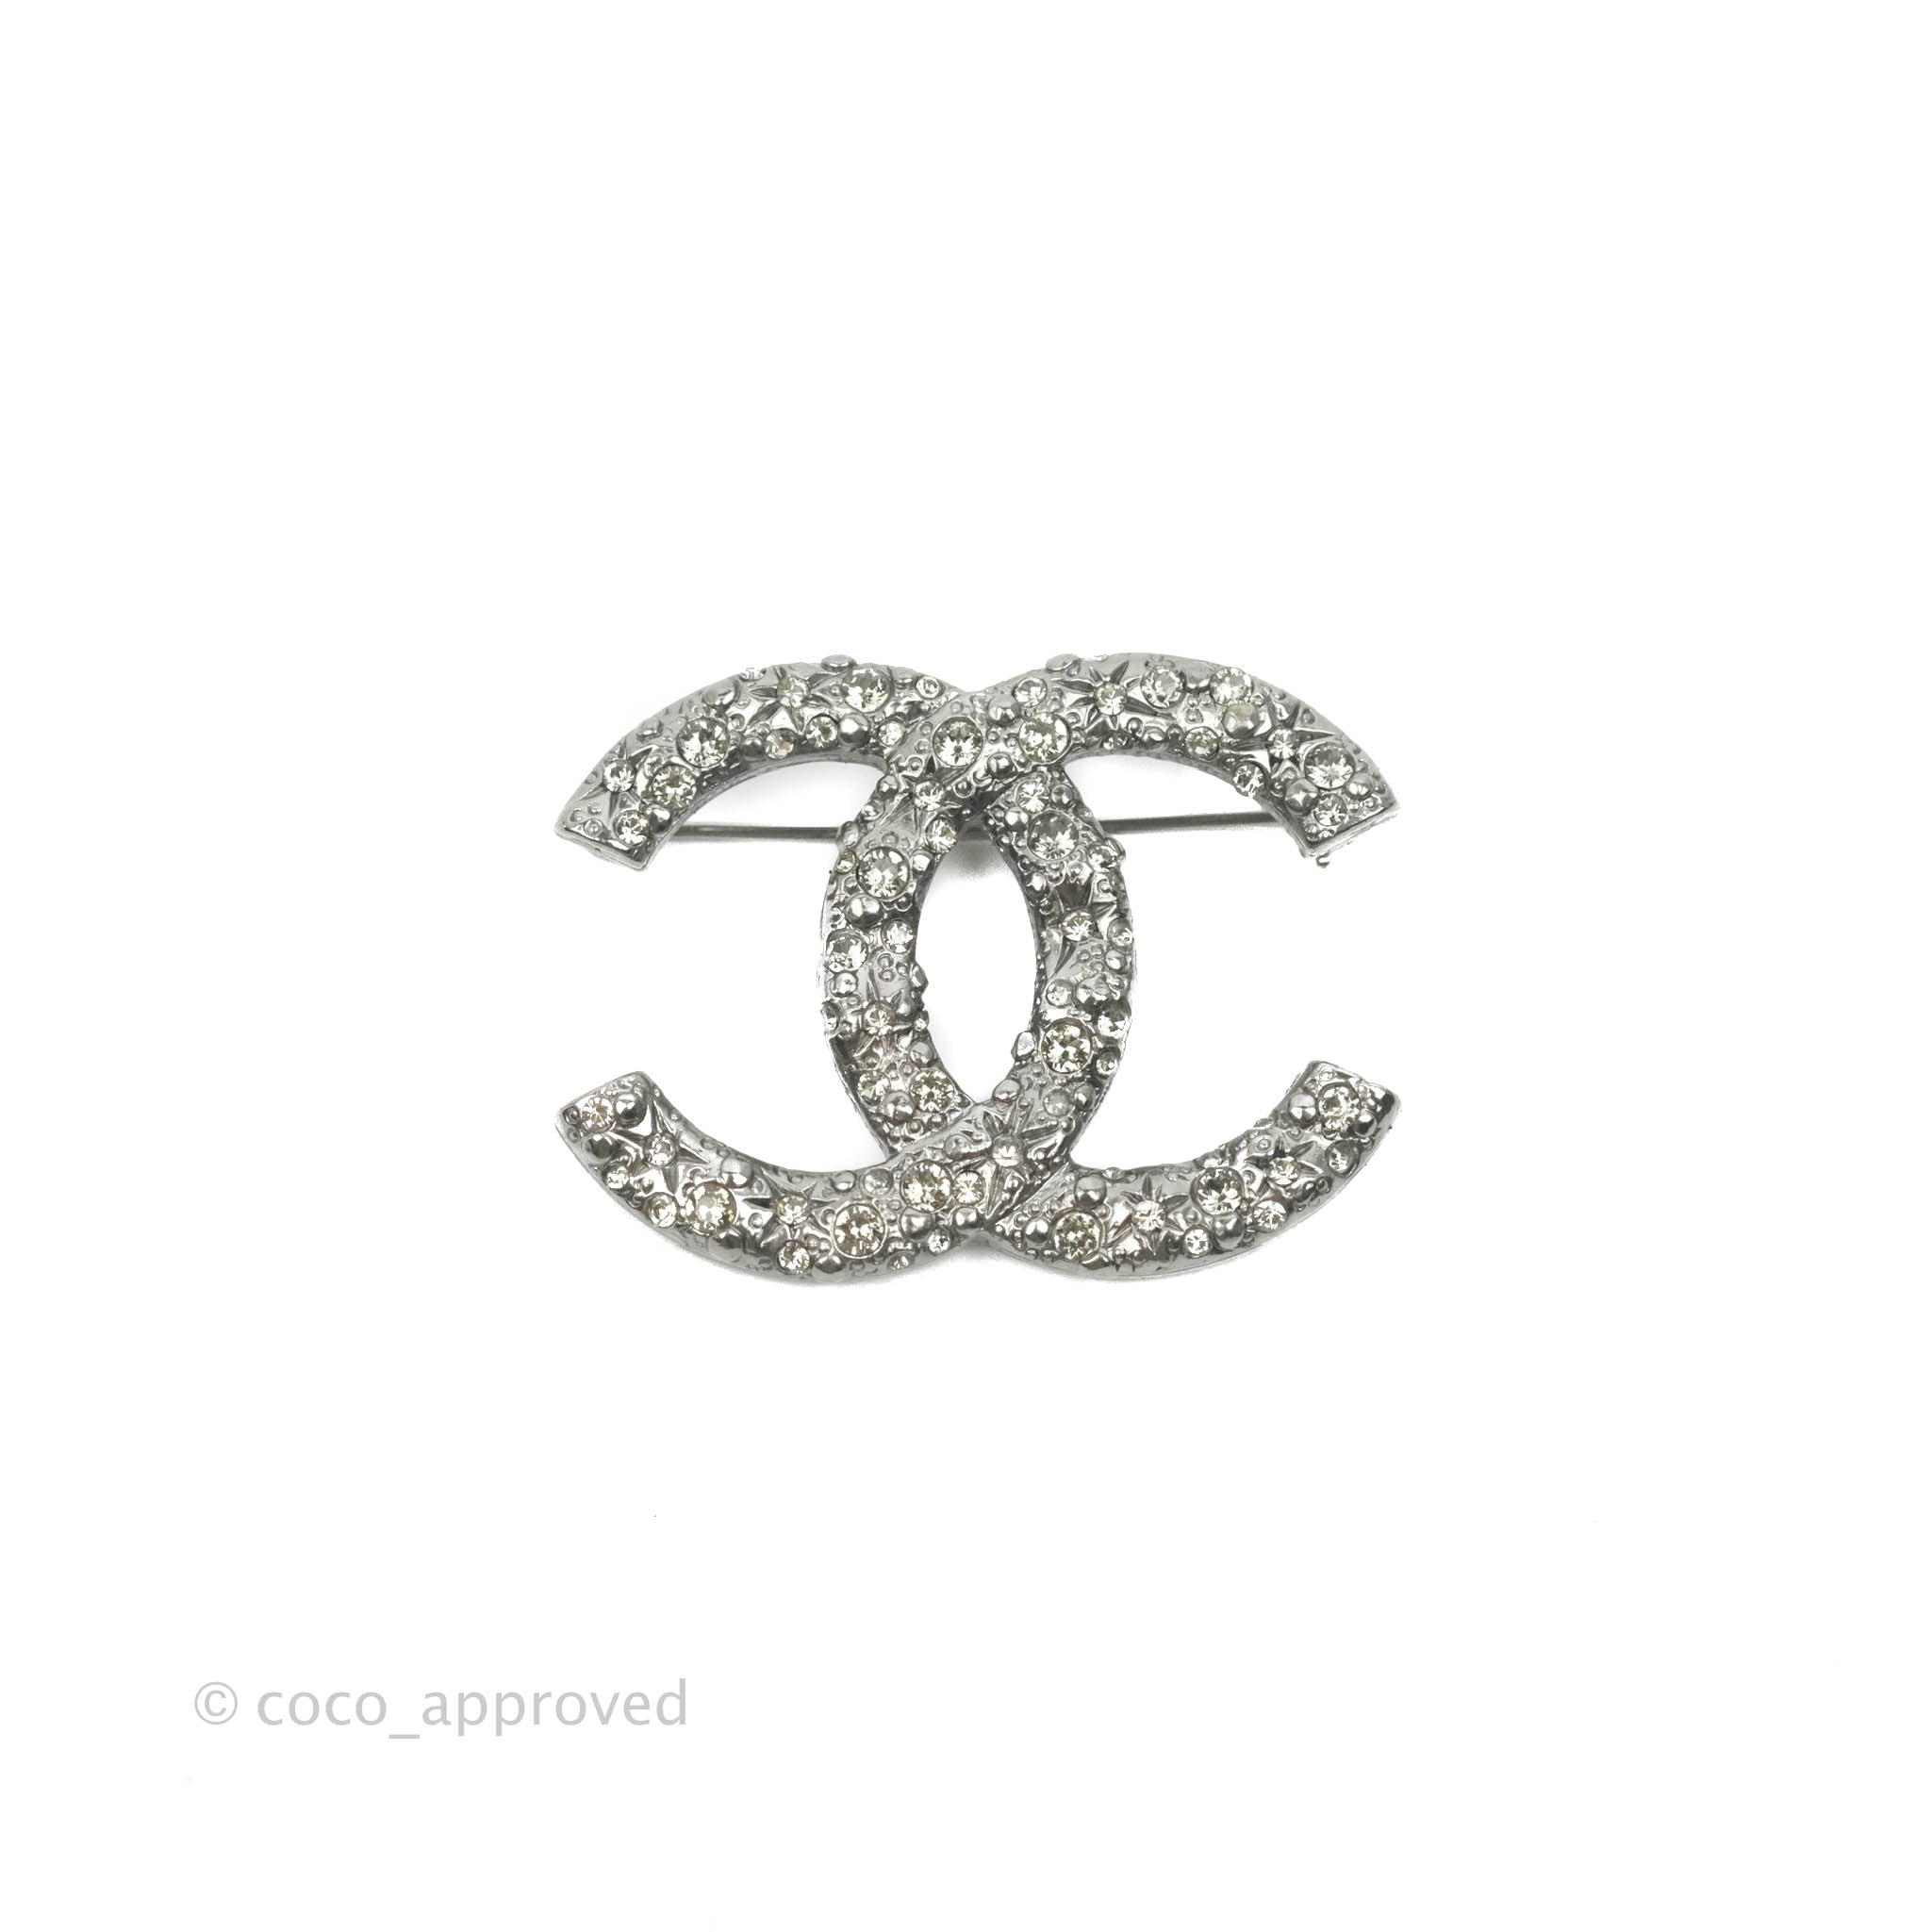 Chanel CC Crystal Brooch Silver Tone Coco Approved Studio